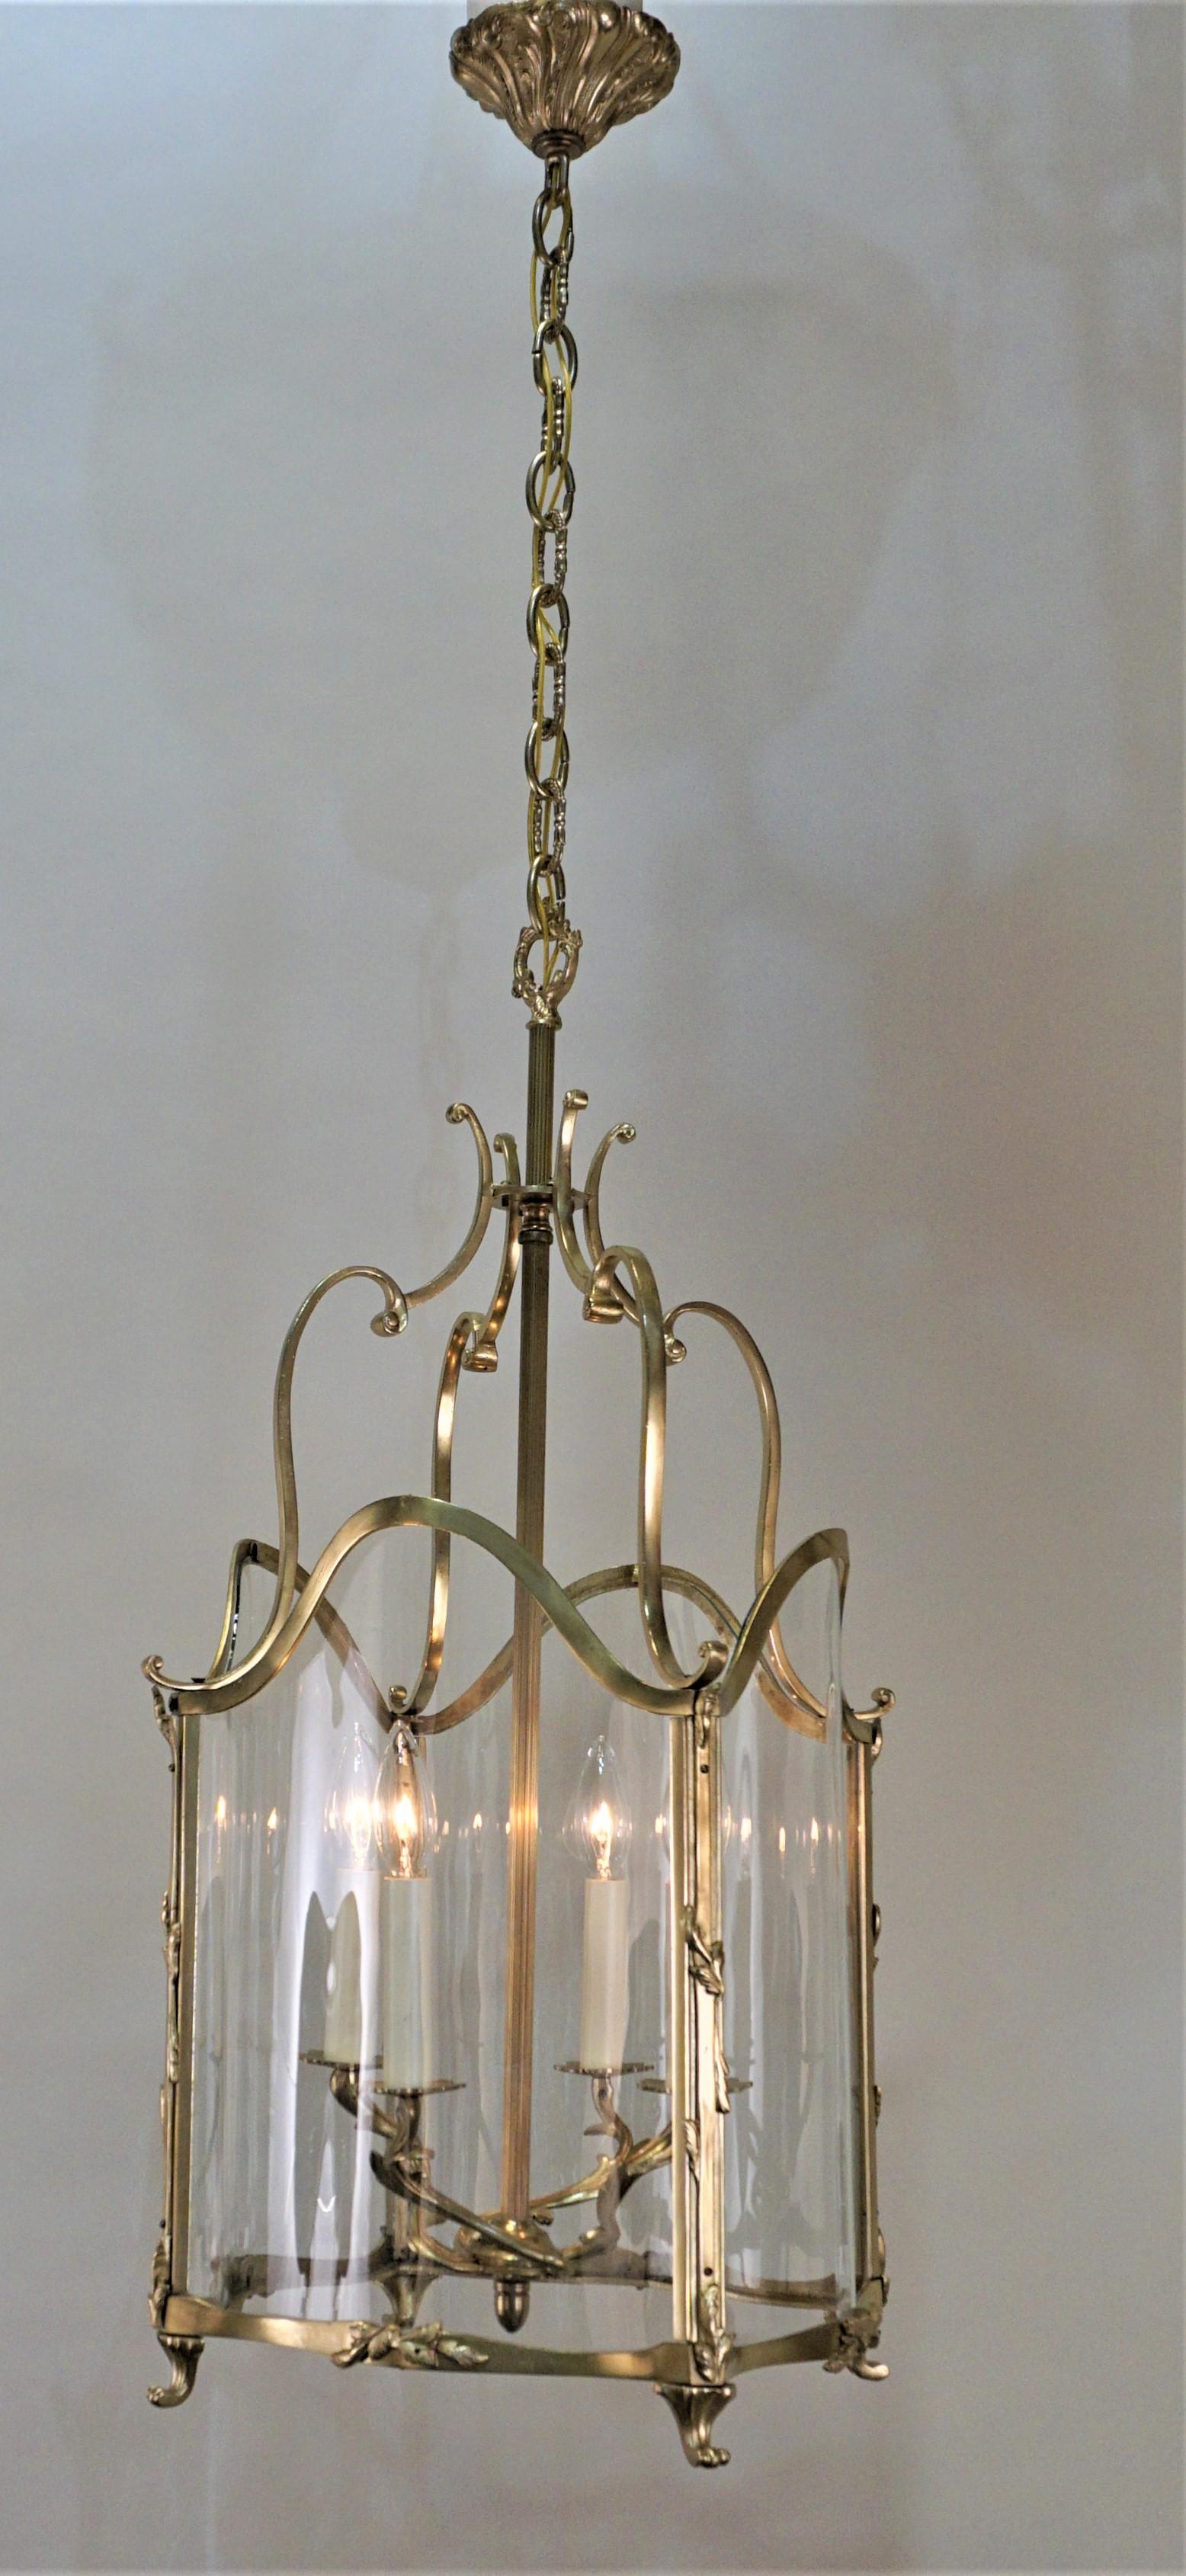 Elegant French electrified bronze lantern with carved panels.
Four-light 60 watts each
Measures: Total height of the frame is 30